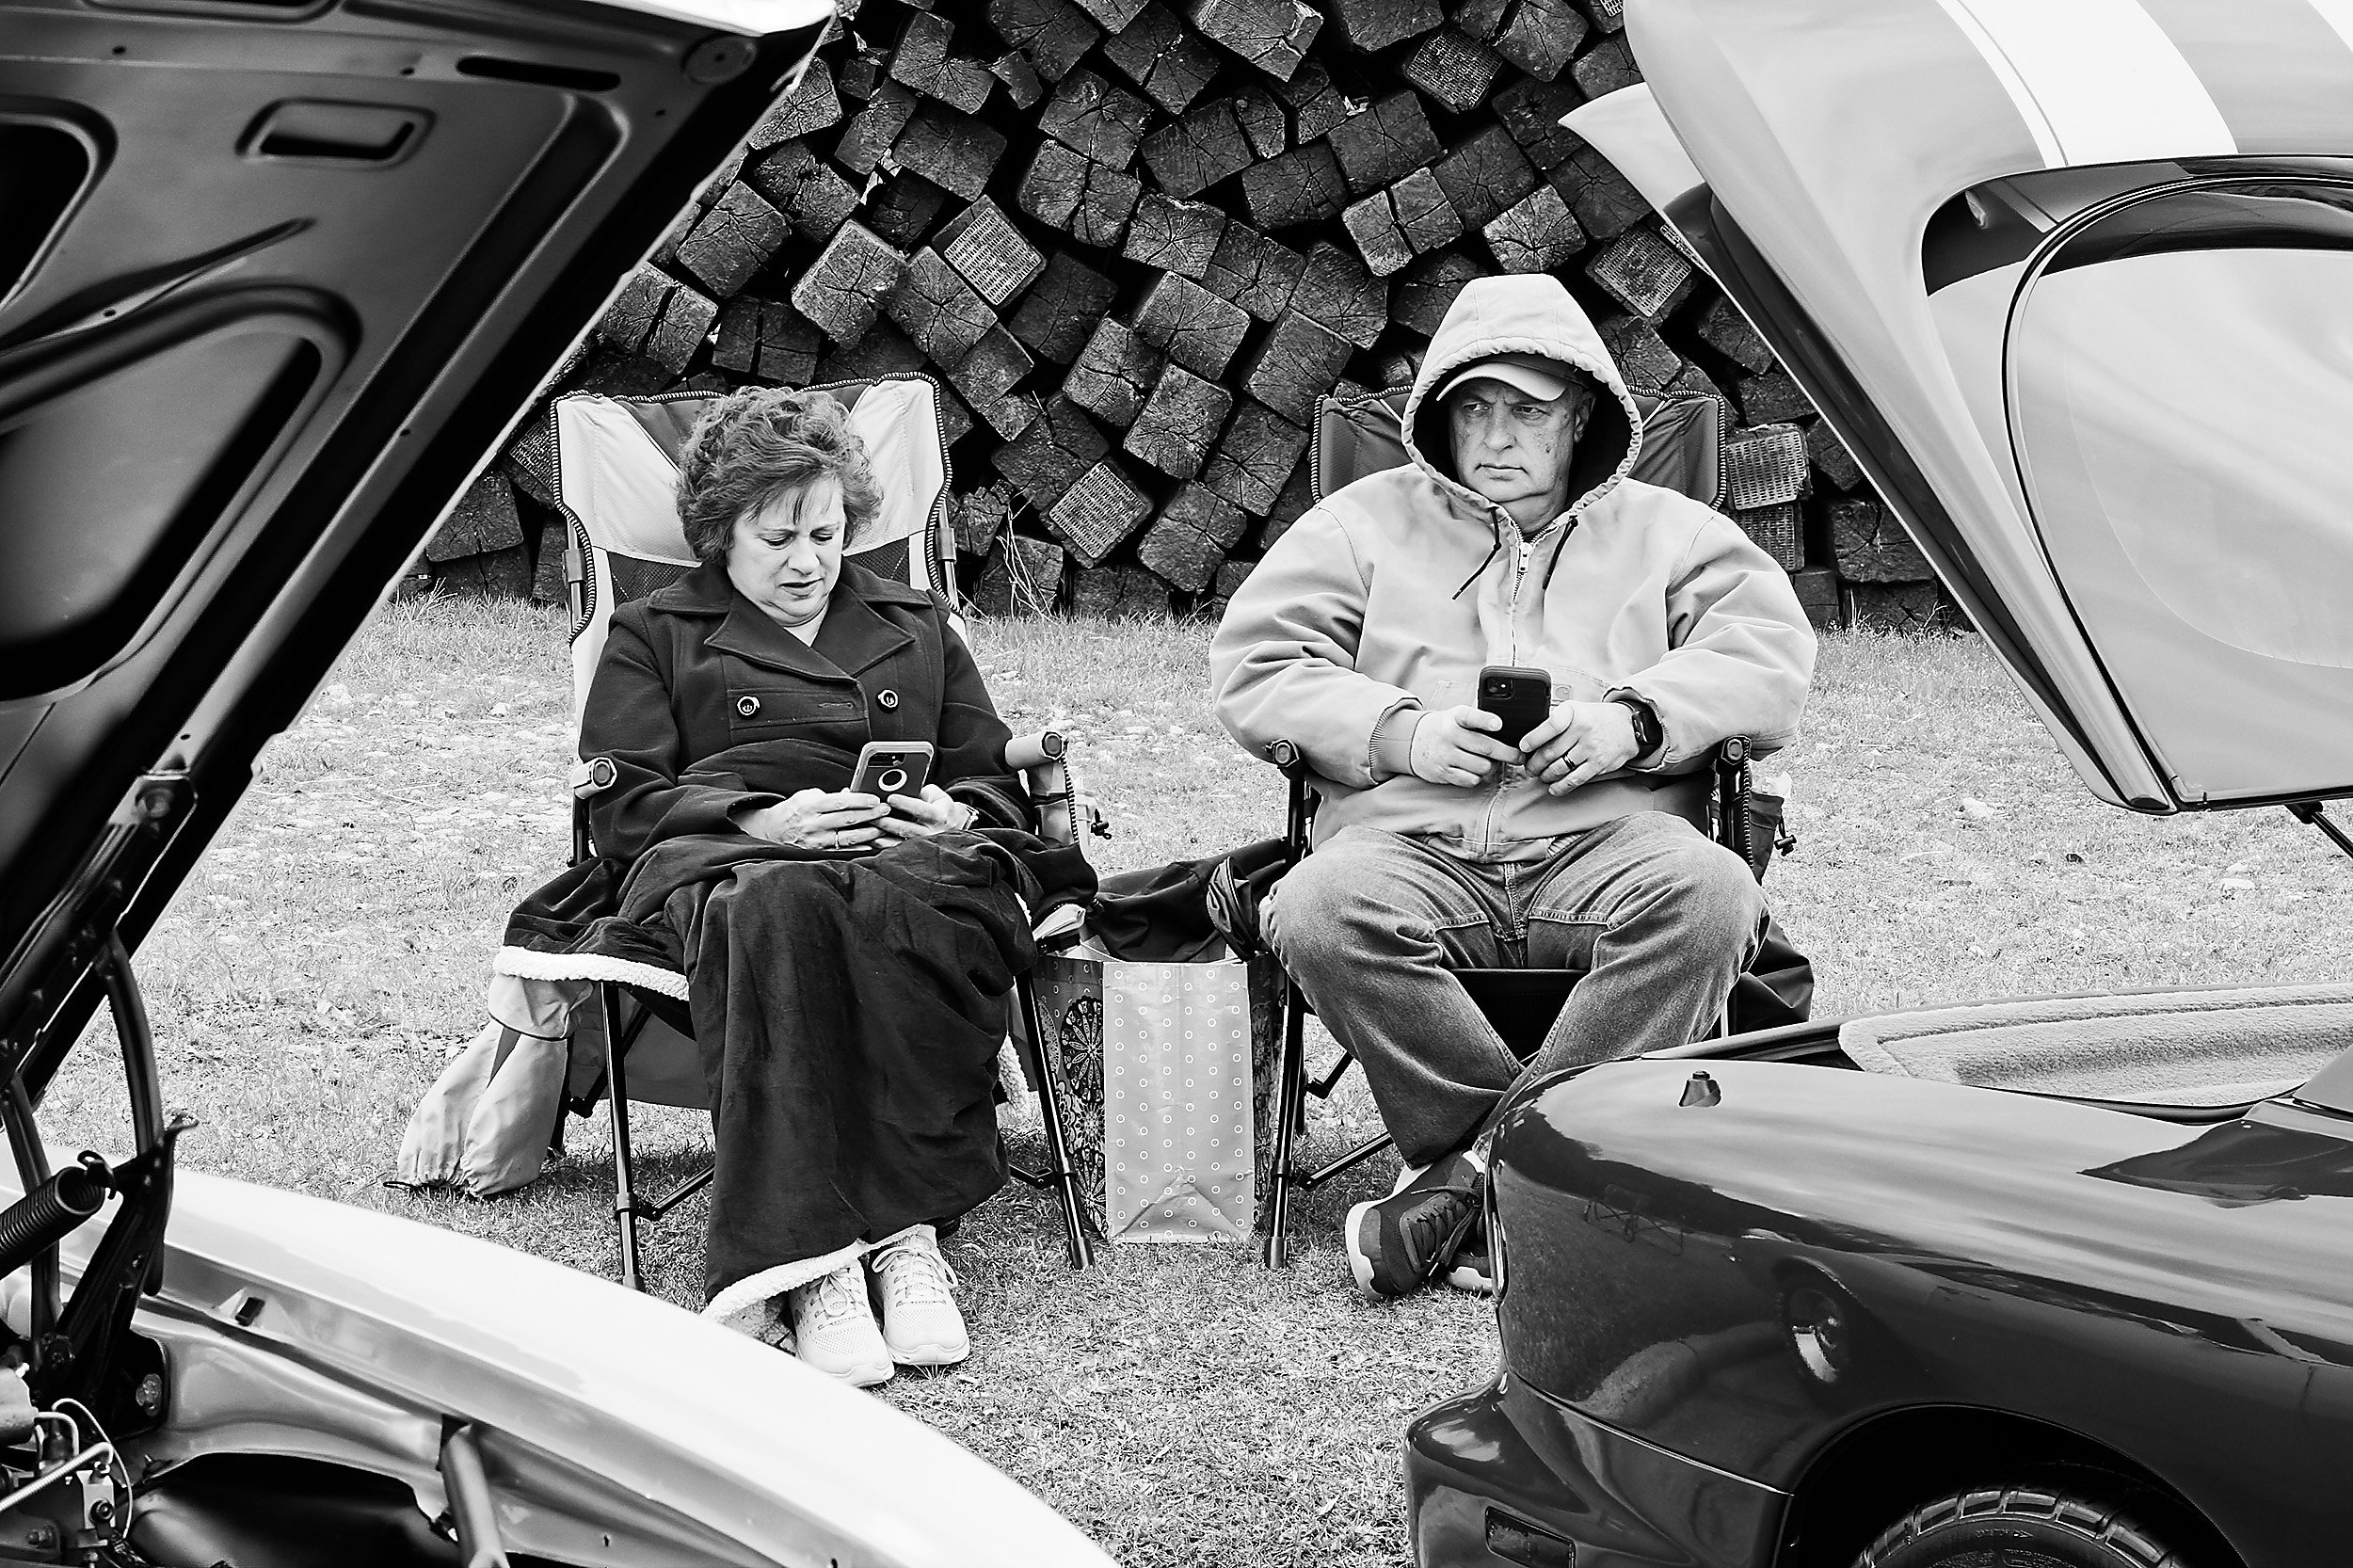  black and white image of a man and a woman sitting on foldable chairs at a vintage car show 